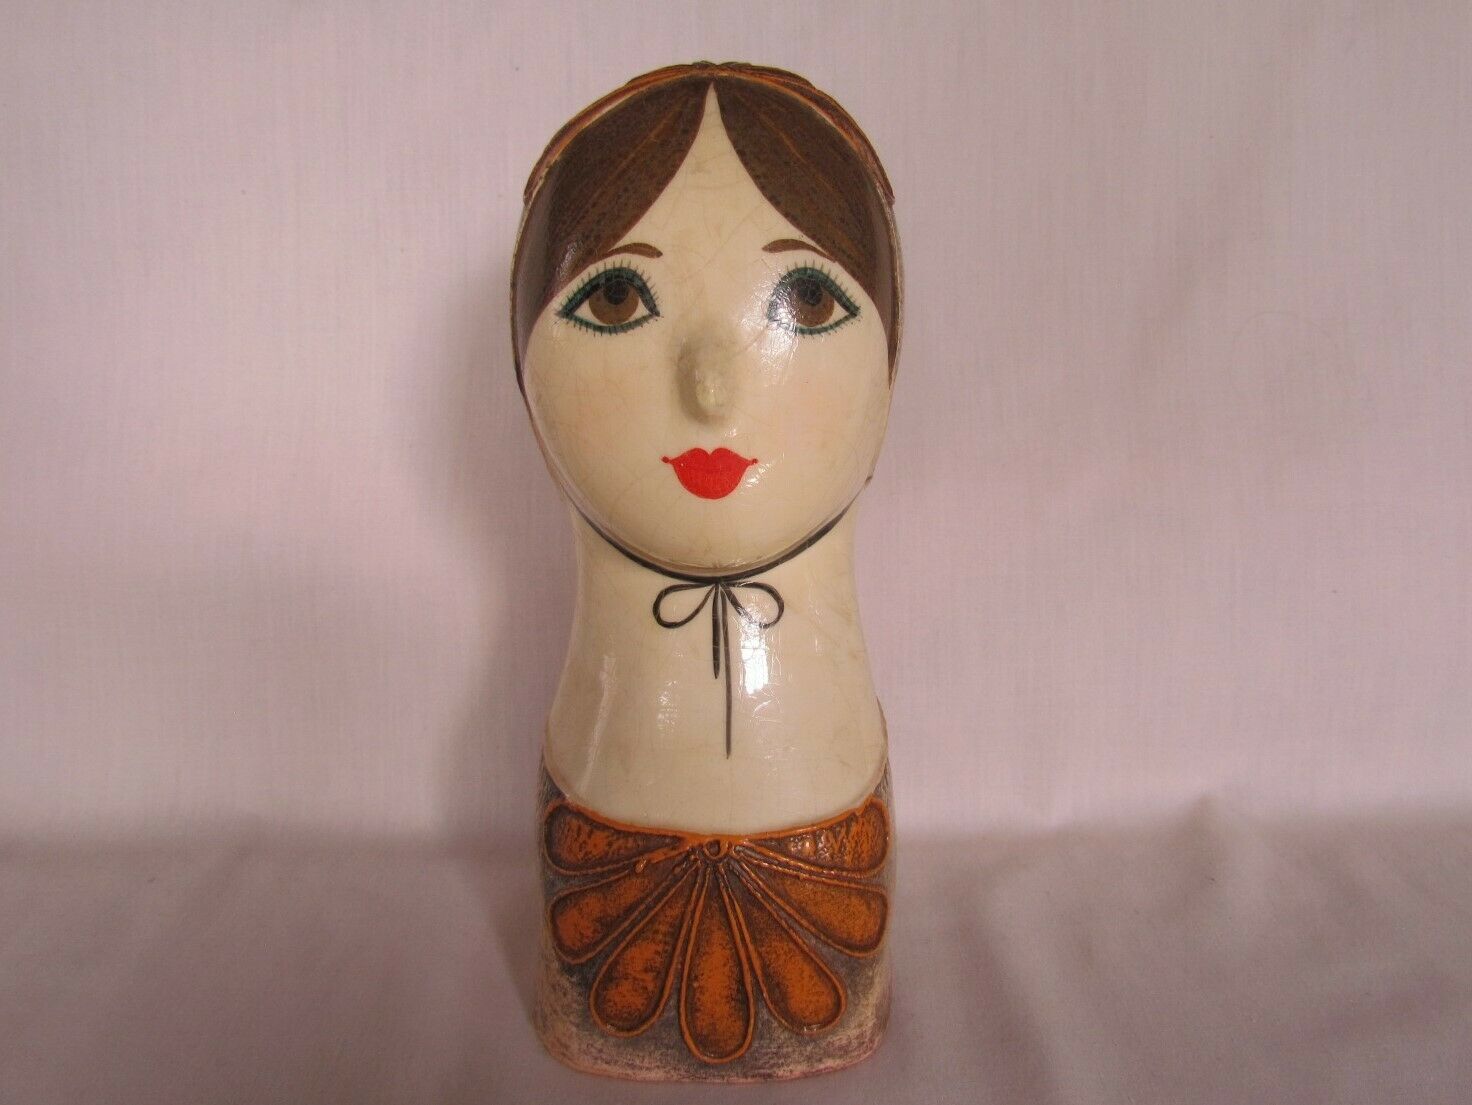 VINTAGE WOMAN'S HEAD OR BUST GEMMA TACCOGNA SIGNED CAPISTRANO MEXICO - $195.00